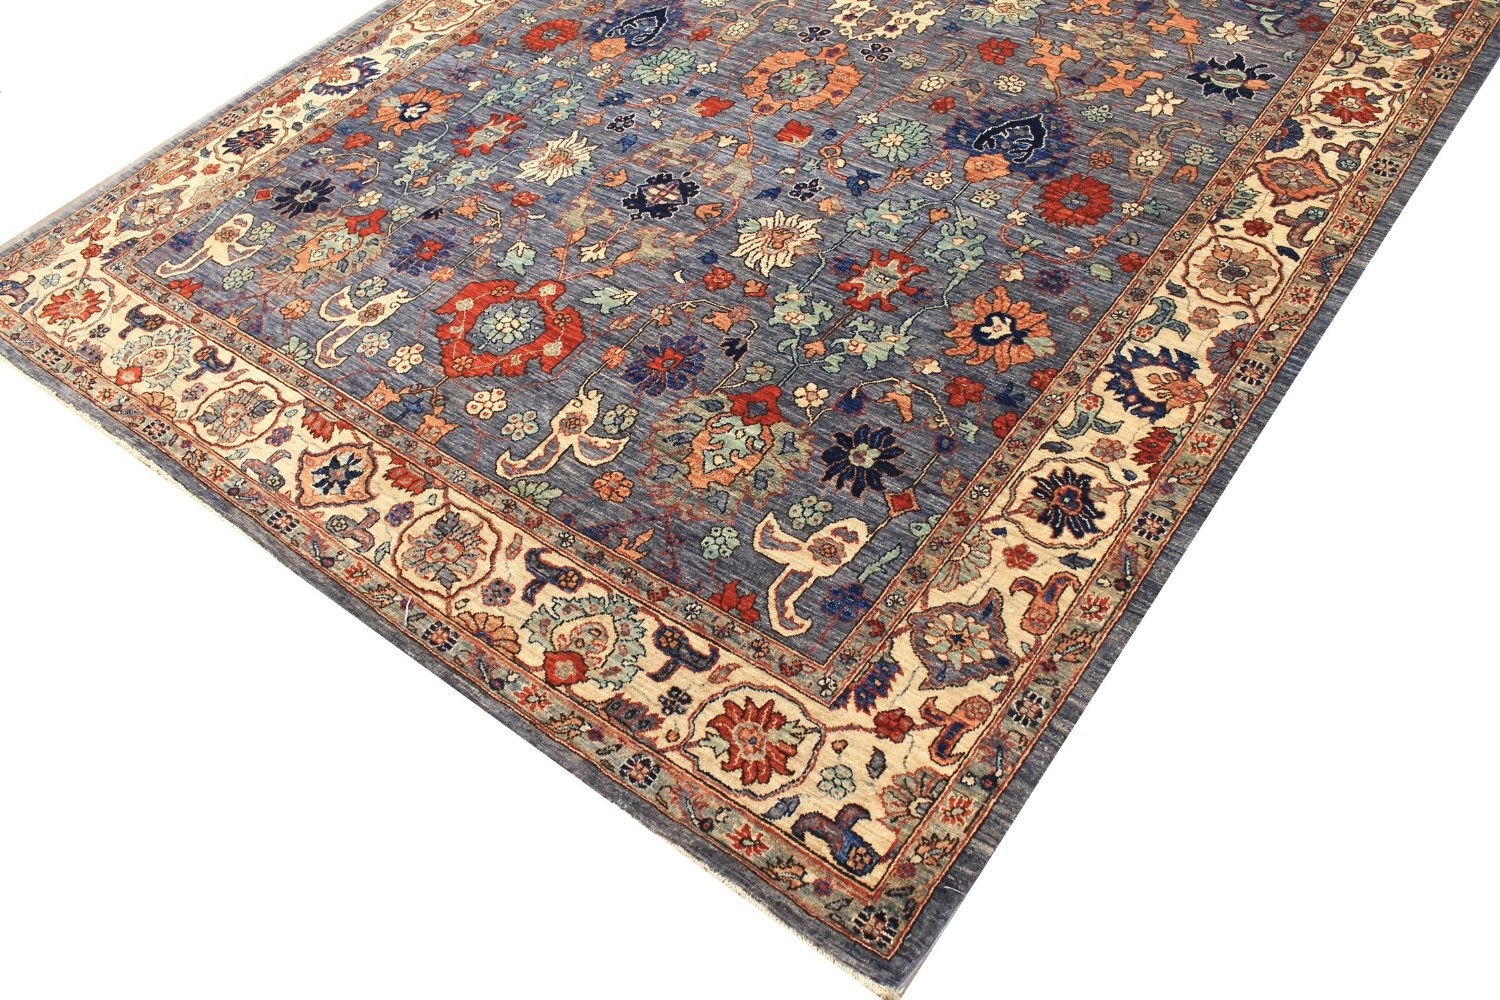 8x10 Aryana & Antique Revivals Hand Knotted Wool Area Rug - MR027829